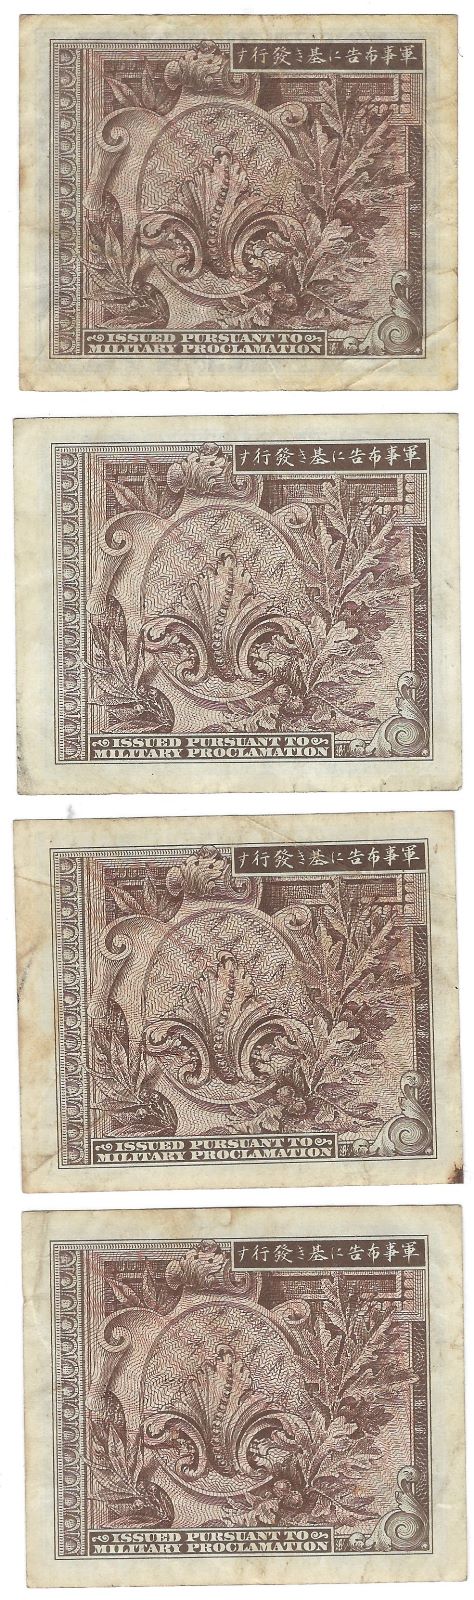 JAPAN - WWII Allied Military Currency 1 Yen x 4 Notes ("A" ) 1945, P-66, Fine-VF. J1a3